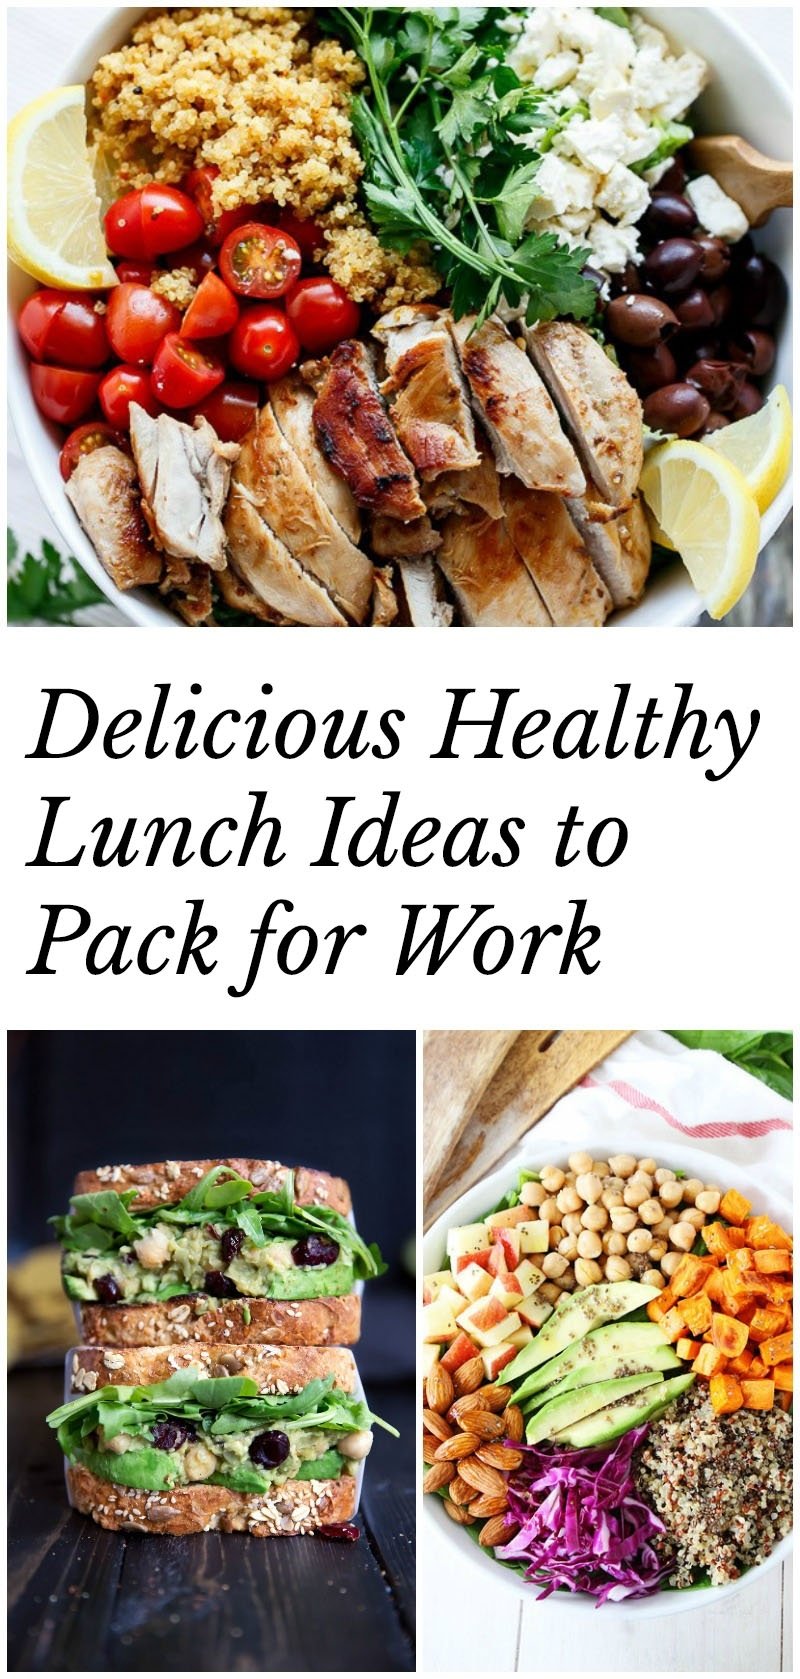 10 Famous Cheap Healthy Lunch Ideas For Work healthy lunch ideas to pack for work 40 recipes 22 2022